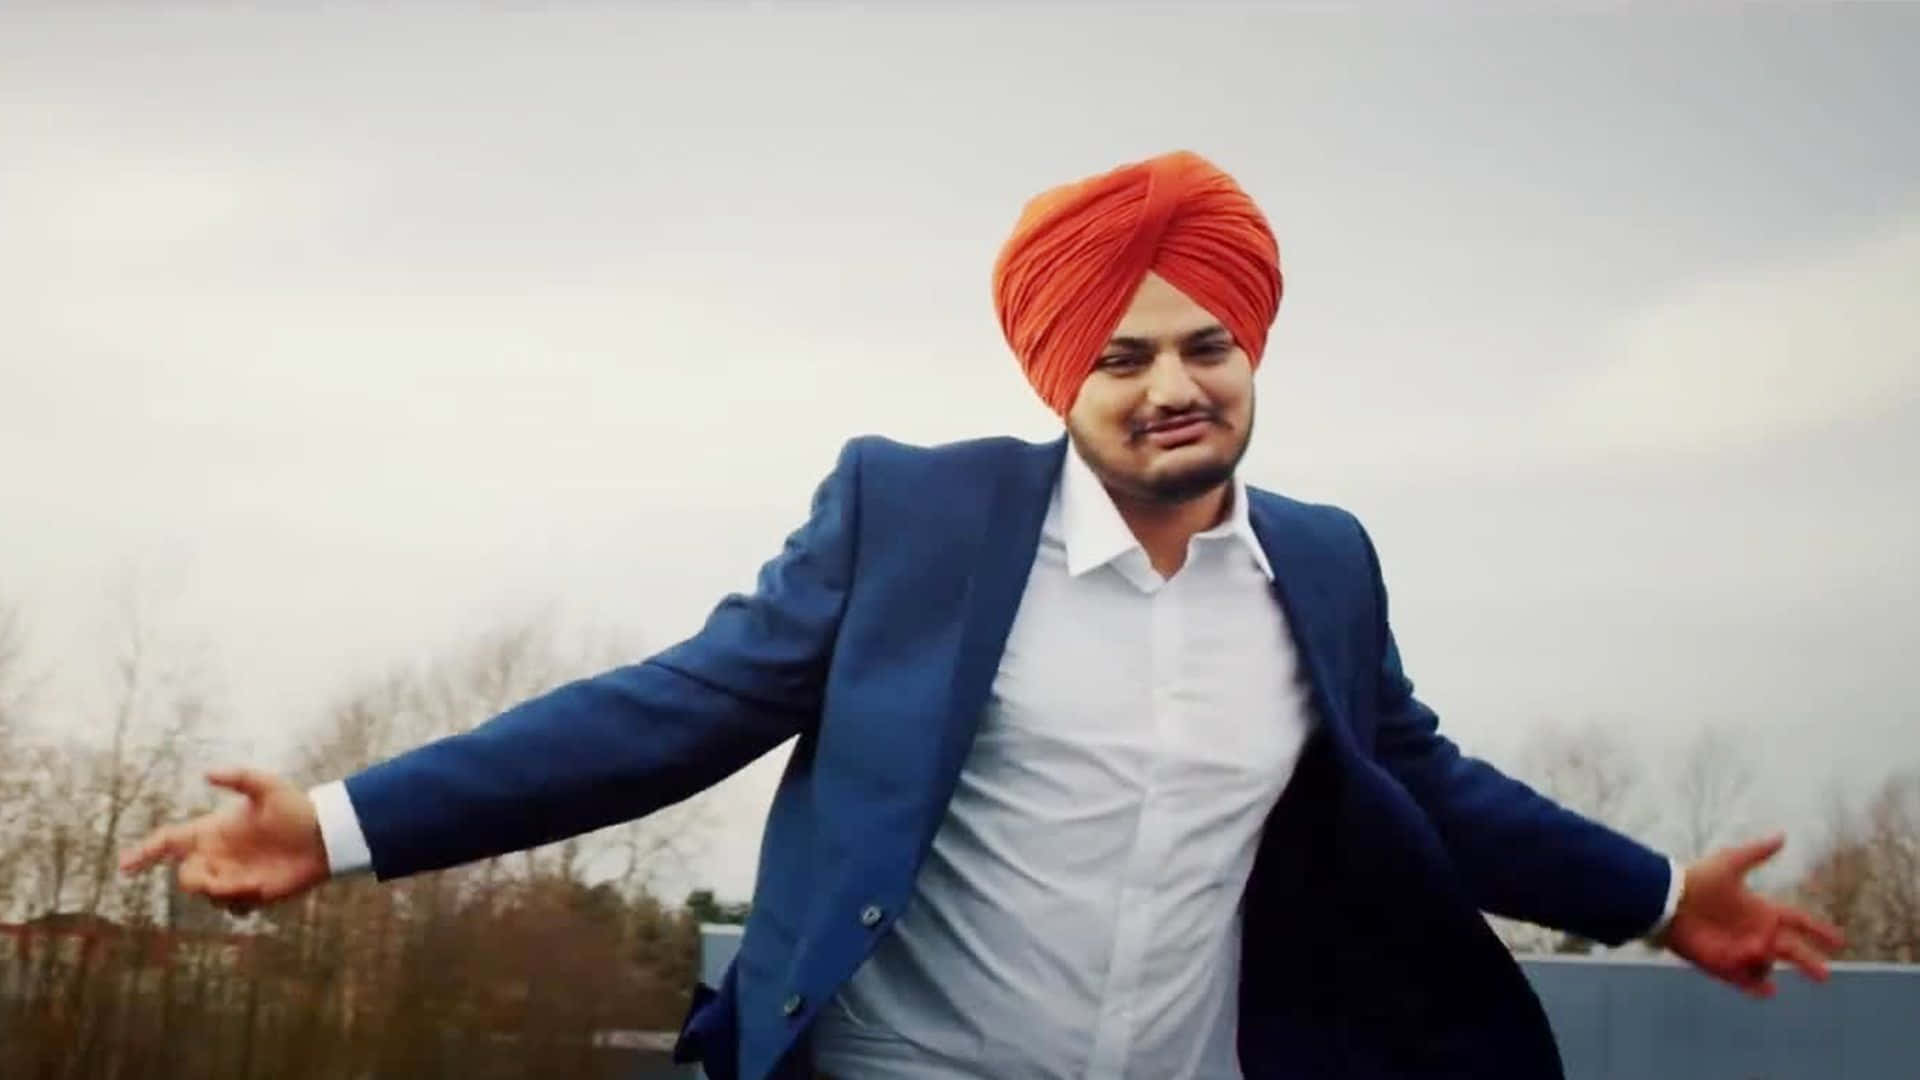 A Man In A Turban Is Dancing In The Air